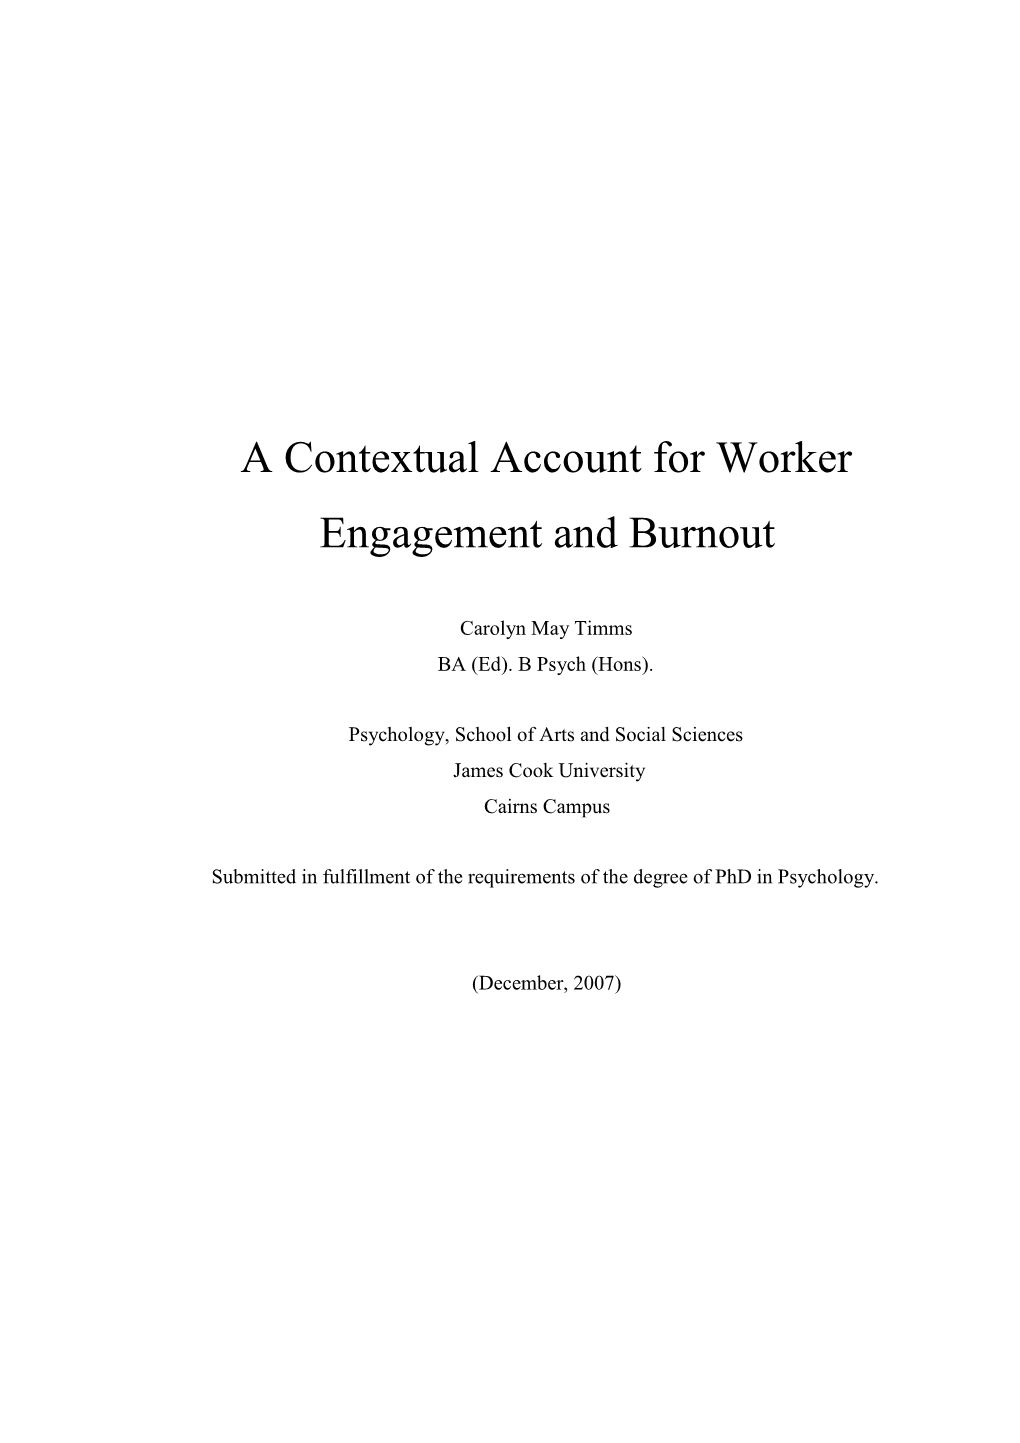 A Contextual Account for Worker Engagement and Burnout